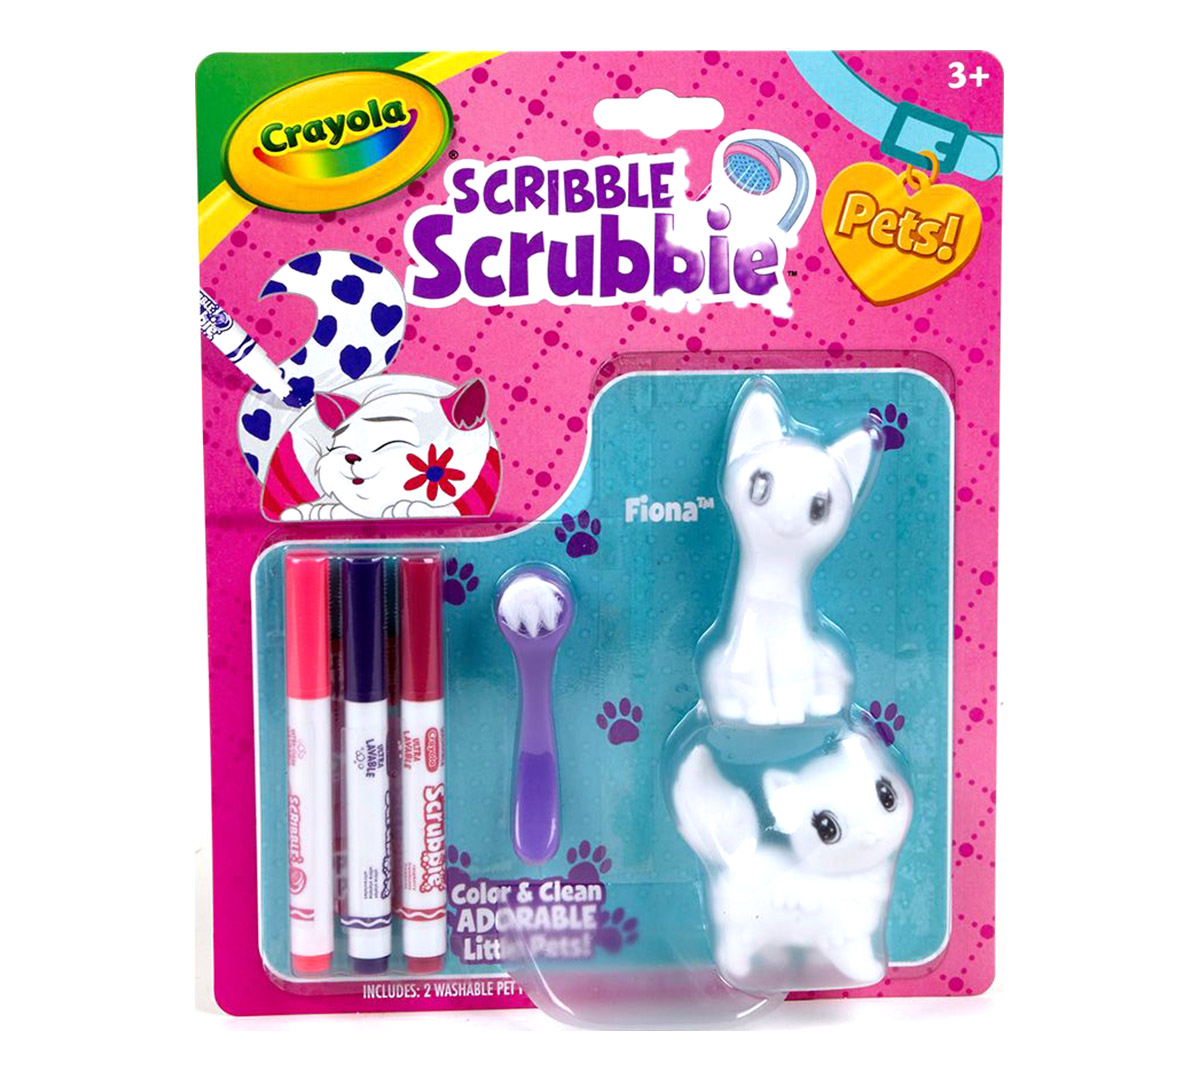 Download Crayola Scribble Scrubbie Pets; 2- Pack of Cats: Fiona and Missy; Creative Activity, Colorable ...